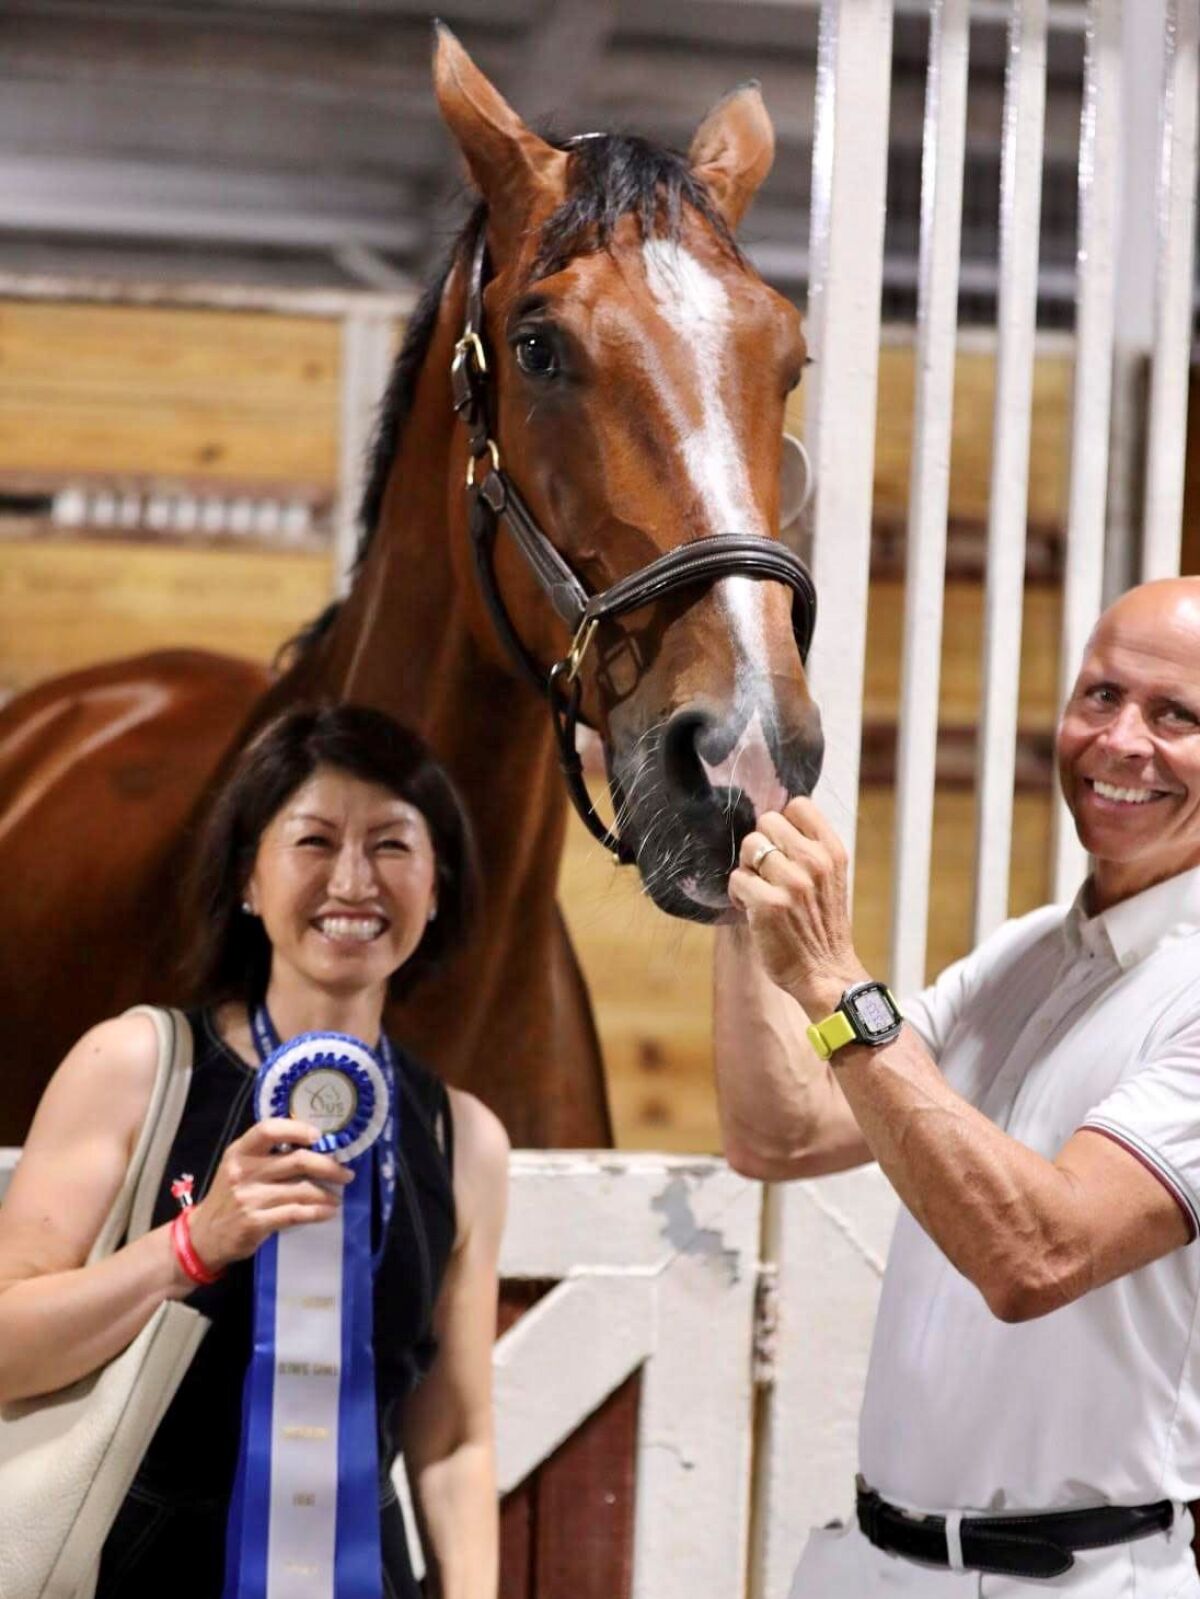 Carmel Valley's Steffen Peters, right, shown with Suppenkasper and owner-sponsor Akiko Yamazaki at the recent Olympic Trials.